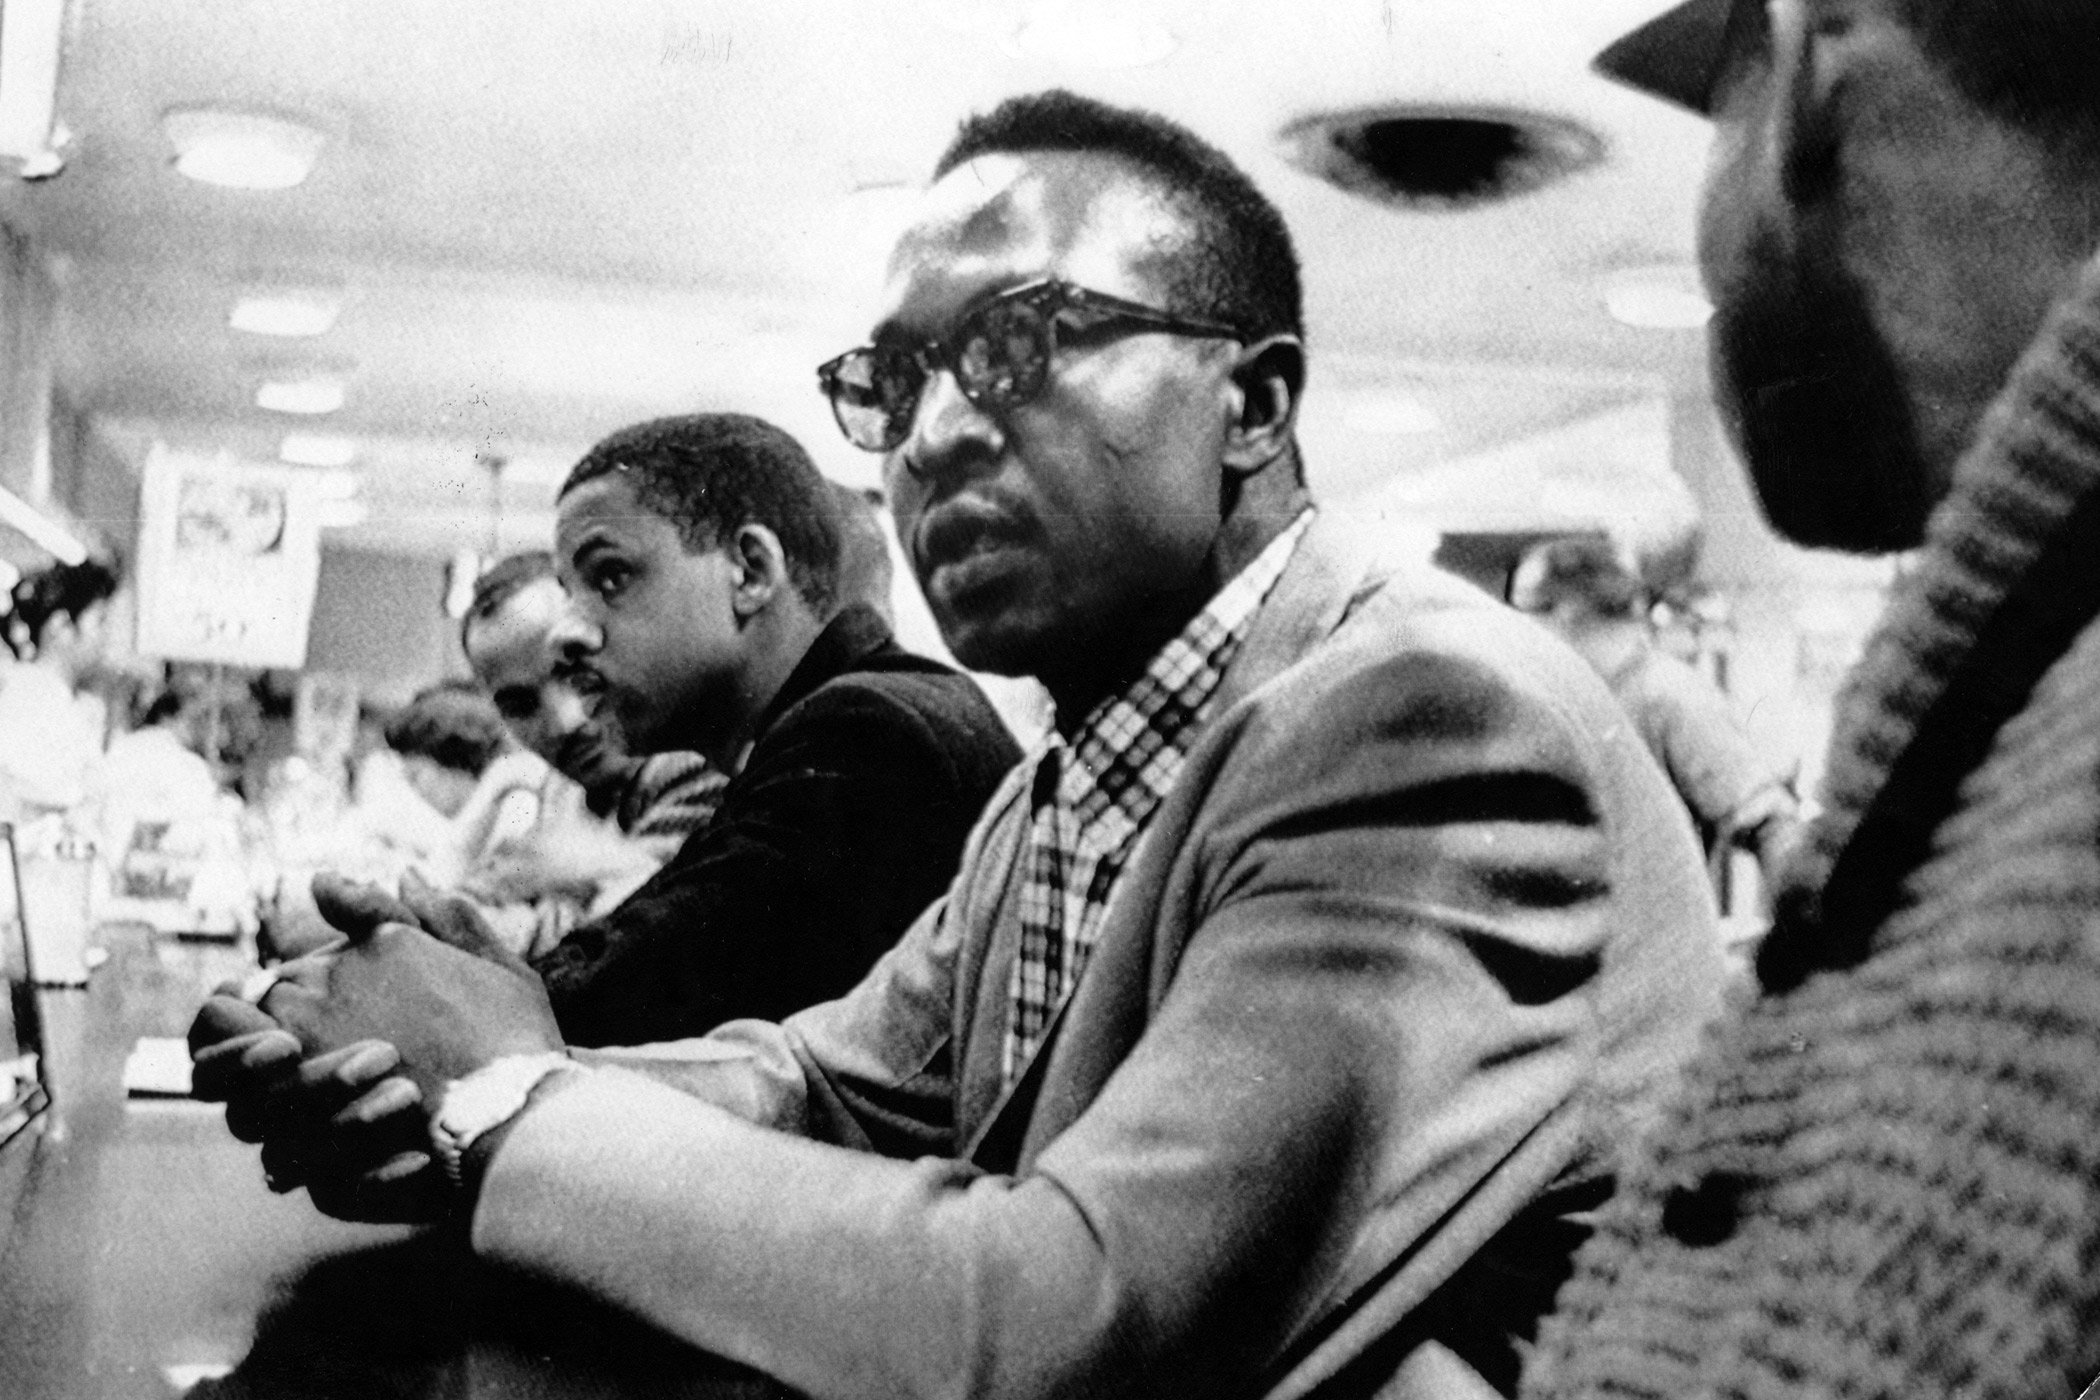 The Greensboro sit-ins, started by four black students from the North Carolina Agricultural and Technical State University, were a peaceful protest of the segregated lunch counter inside the Woolworth store in Greensboro, N.C. in February 1960. The demonstrations, which spread to nearby cities and states, eventually led to the desegregation of the Greensboro Woolworth store.